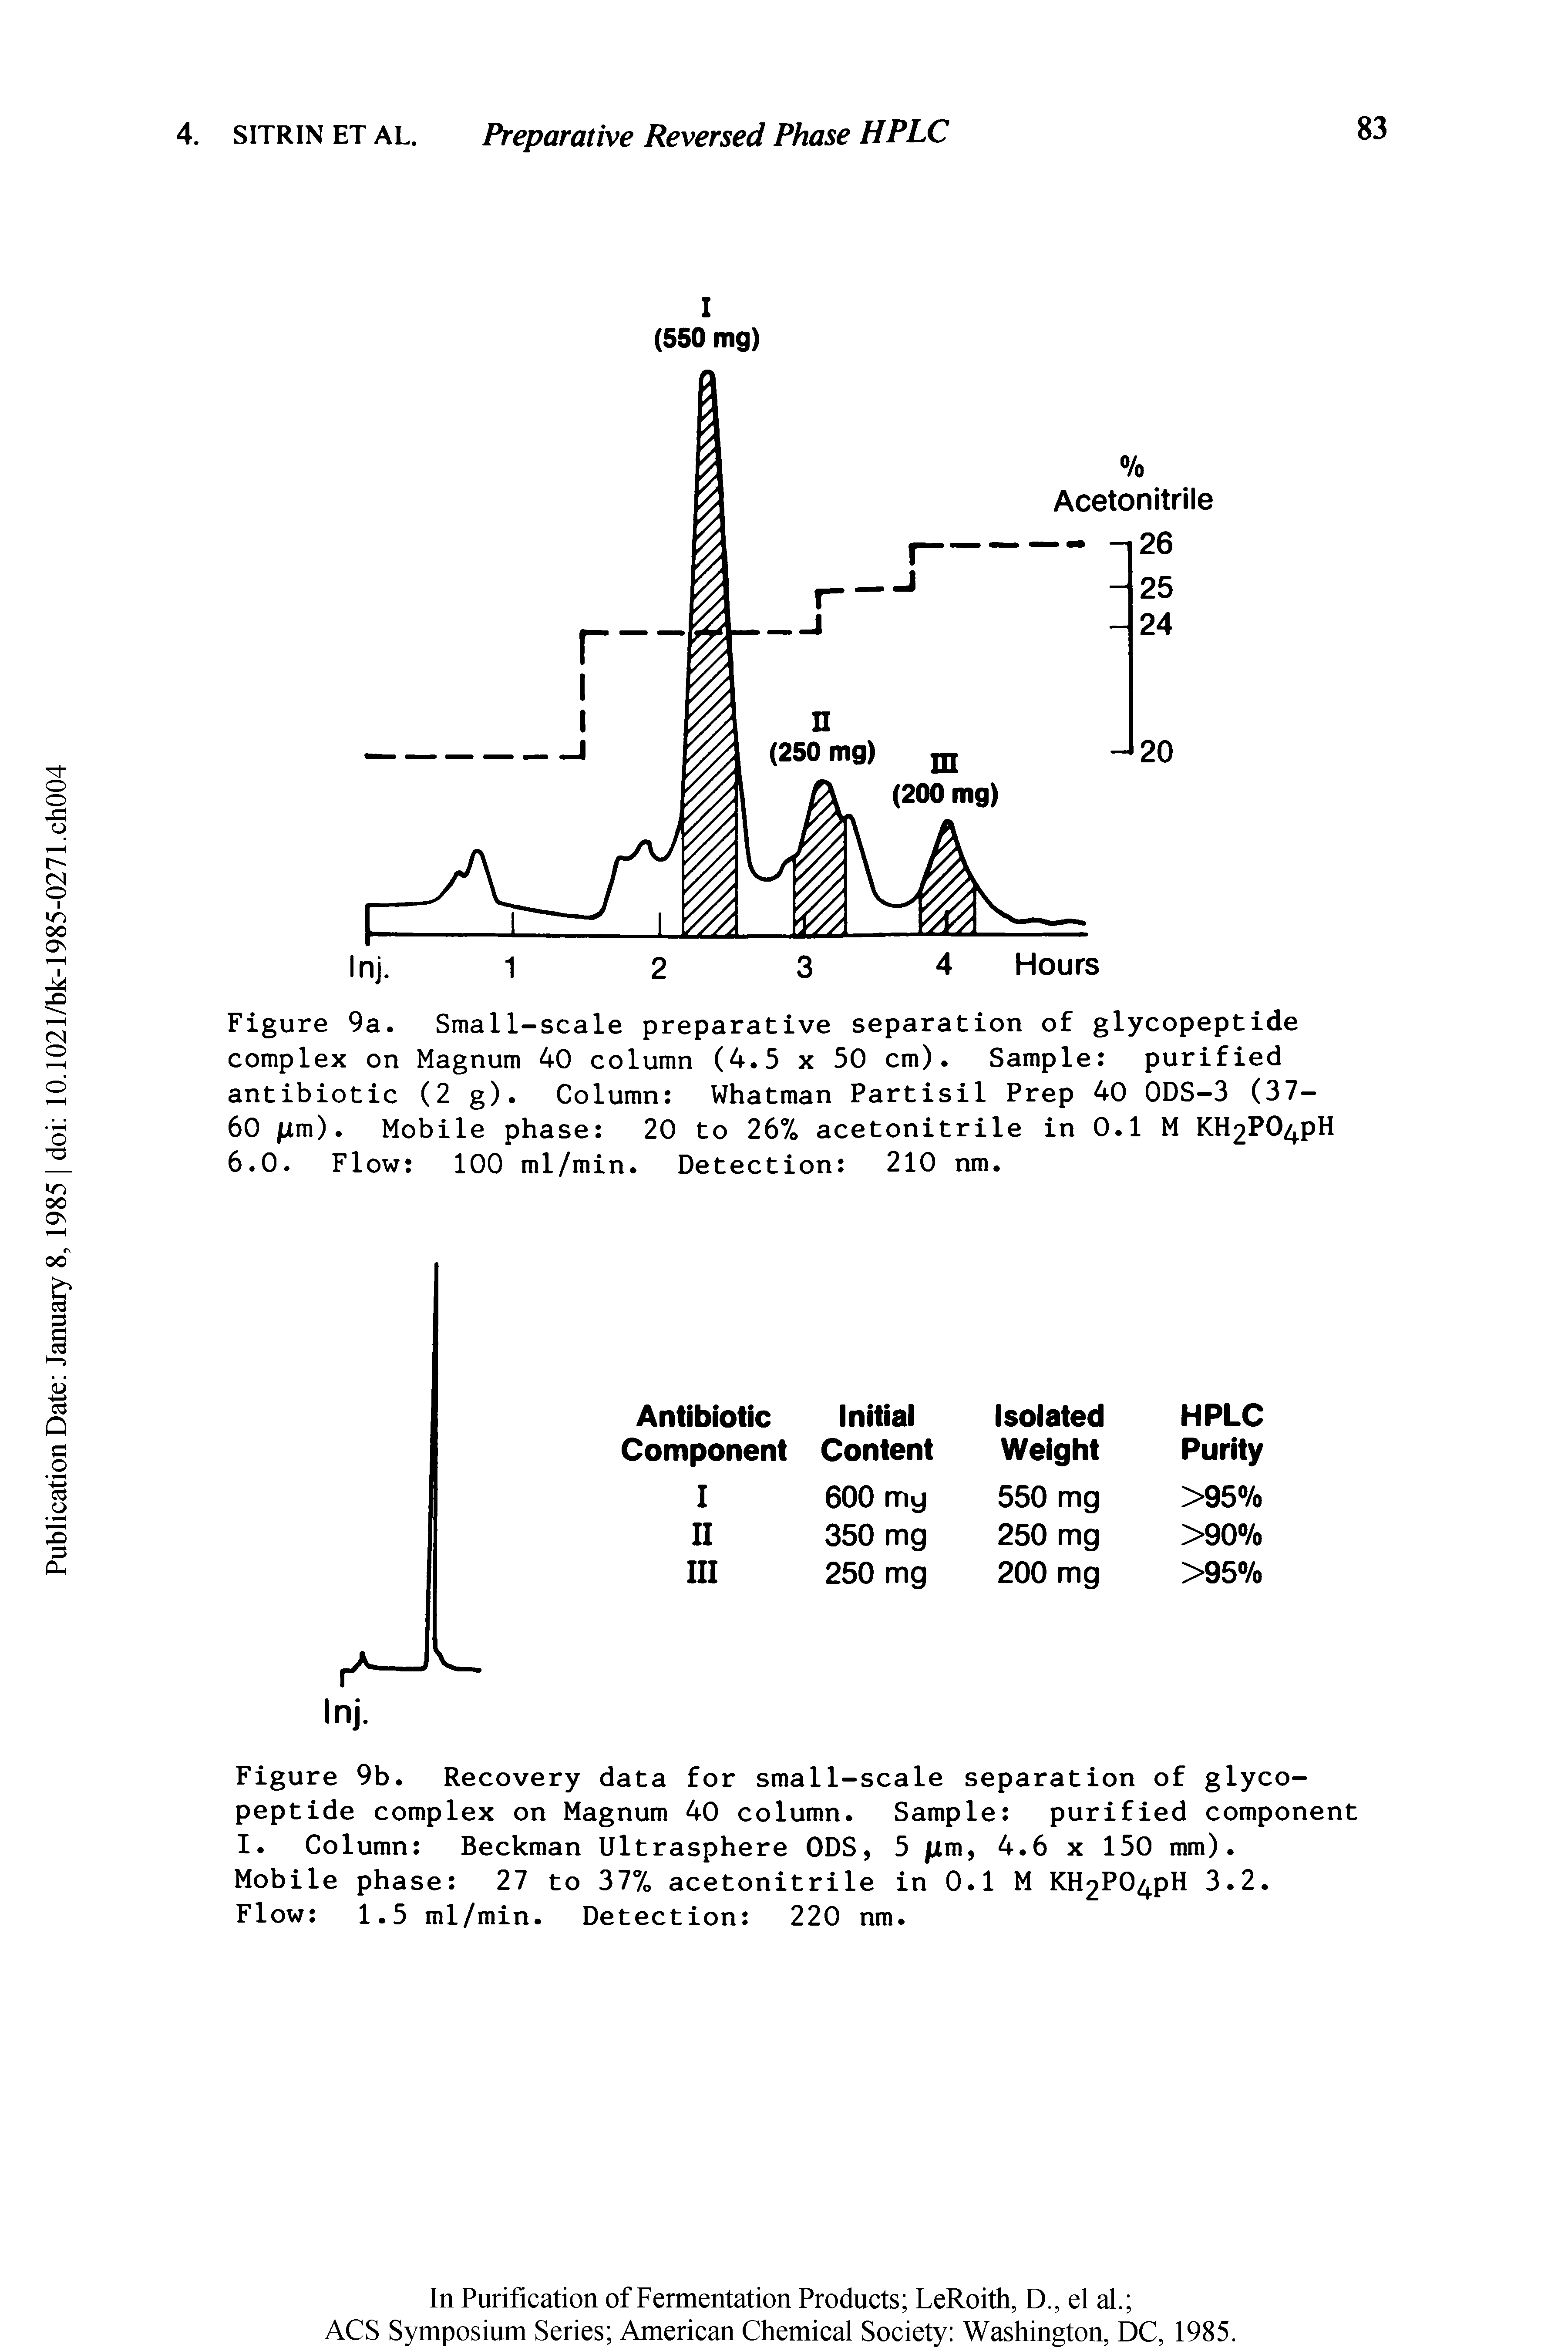 Figure 9b. Recovery data for small-scale separation of glycopeptide complex on Magnum 40 column. Sample purified component I. Column Beckman Ultrasphere 0DS, 5 xm, 4.6 x 150 mm).